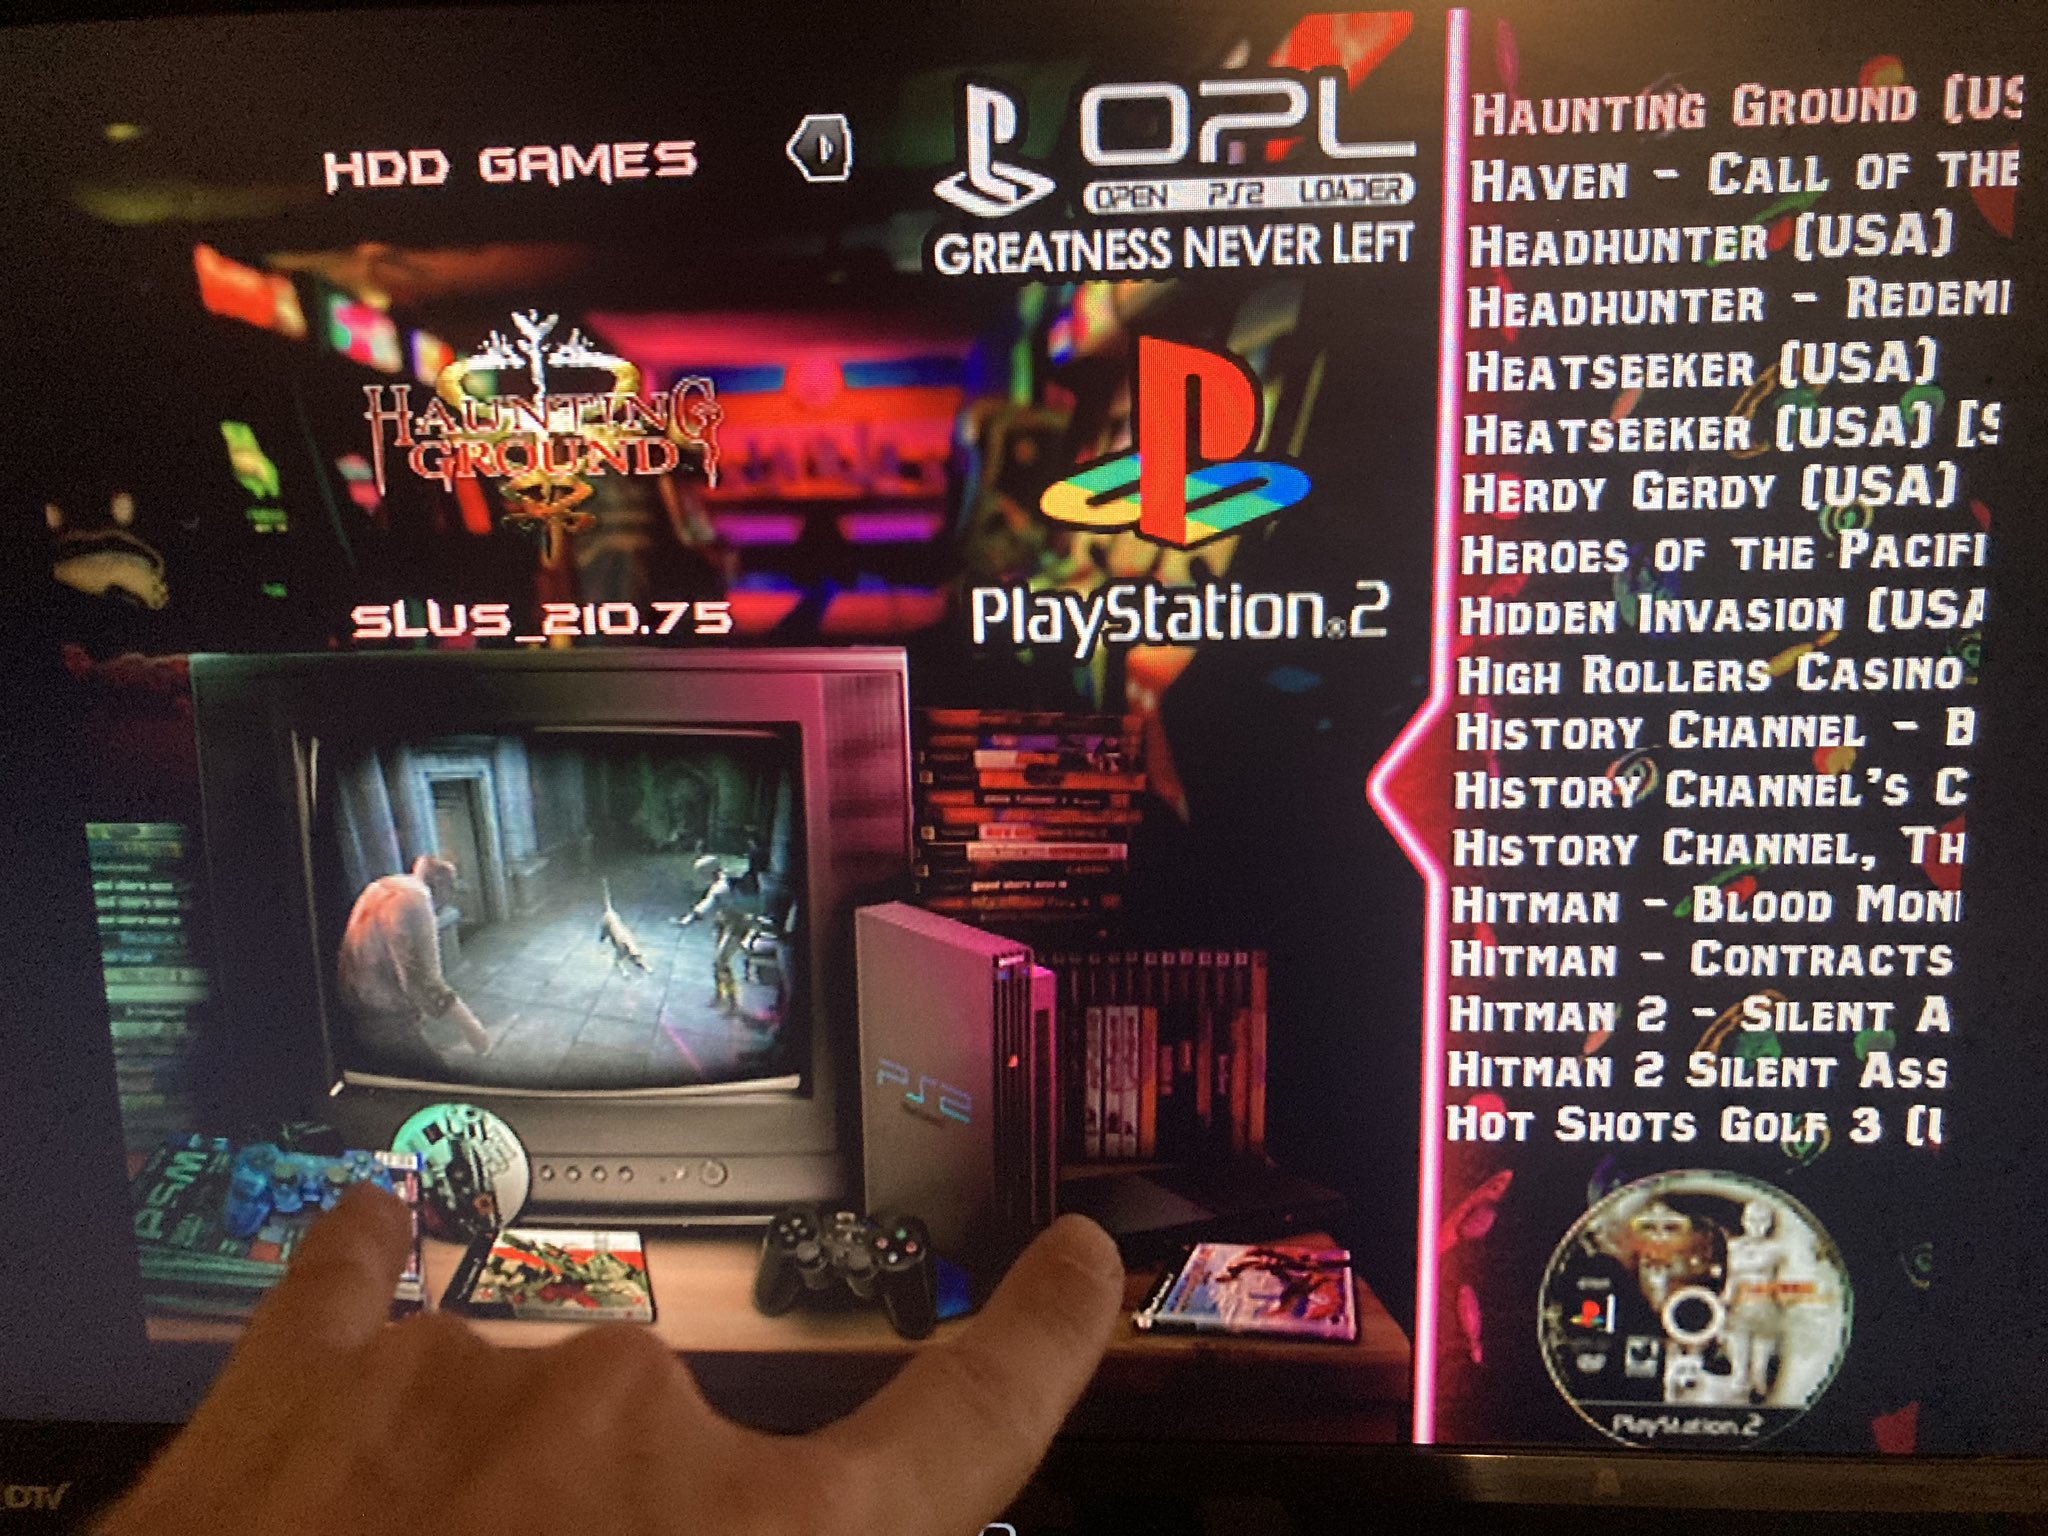 PS2 - Load PS1 titles with OPL - PS1 mode